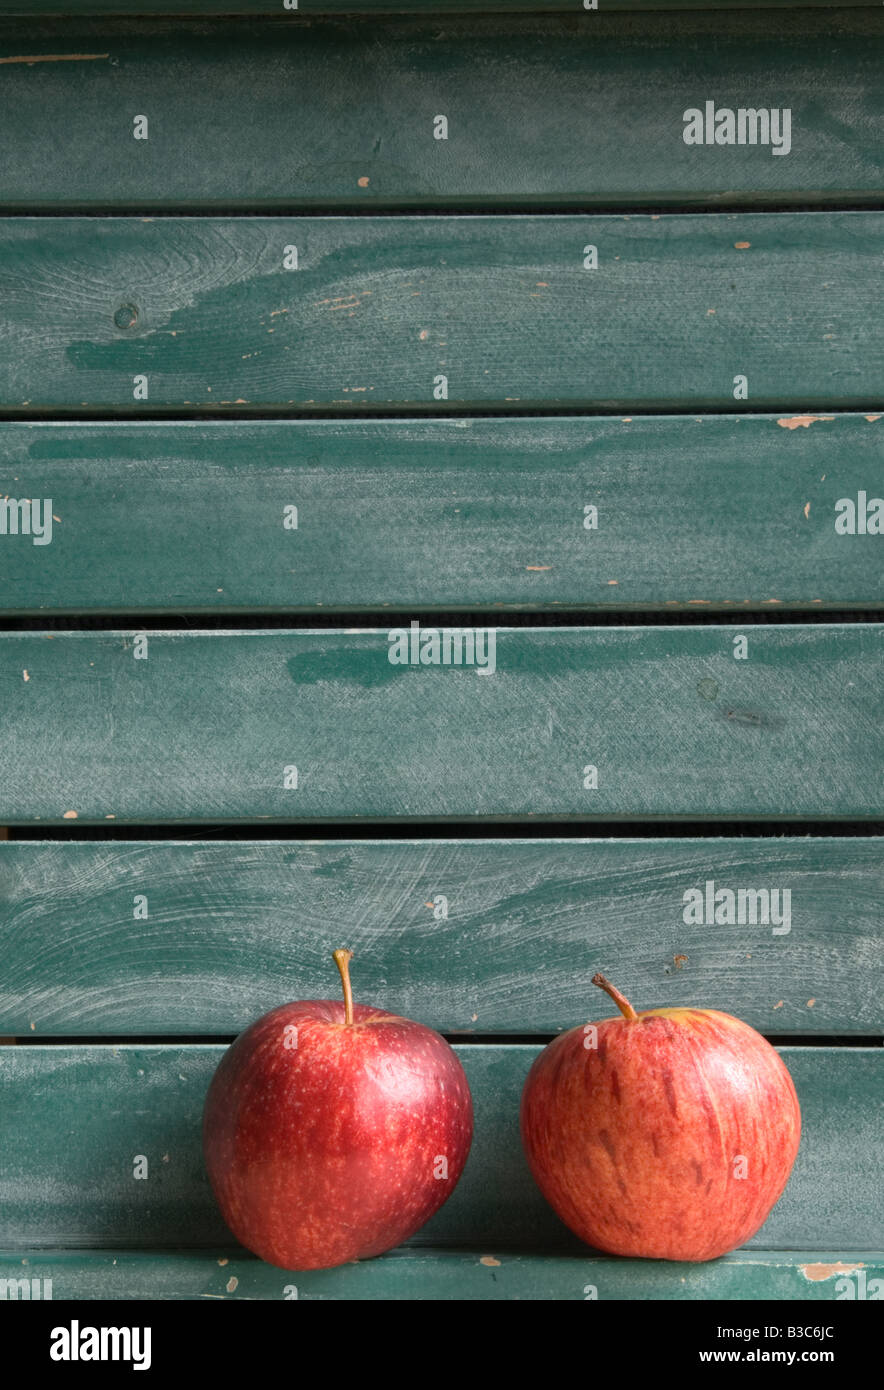 Two red apples against a blue-green slatted wooden background (portrait format) Stock Photo